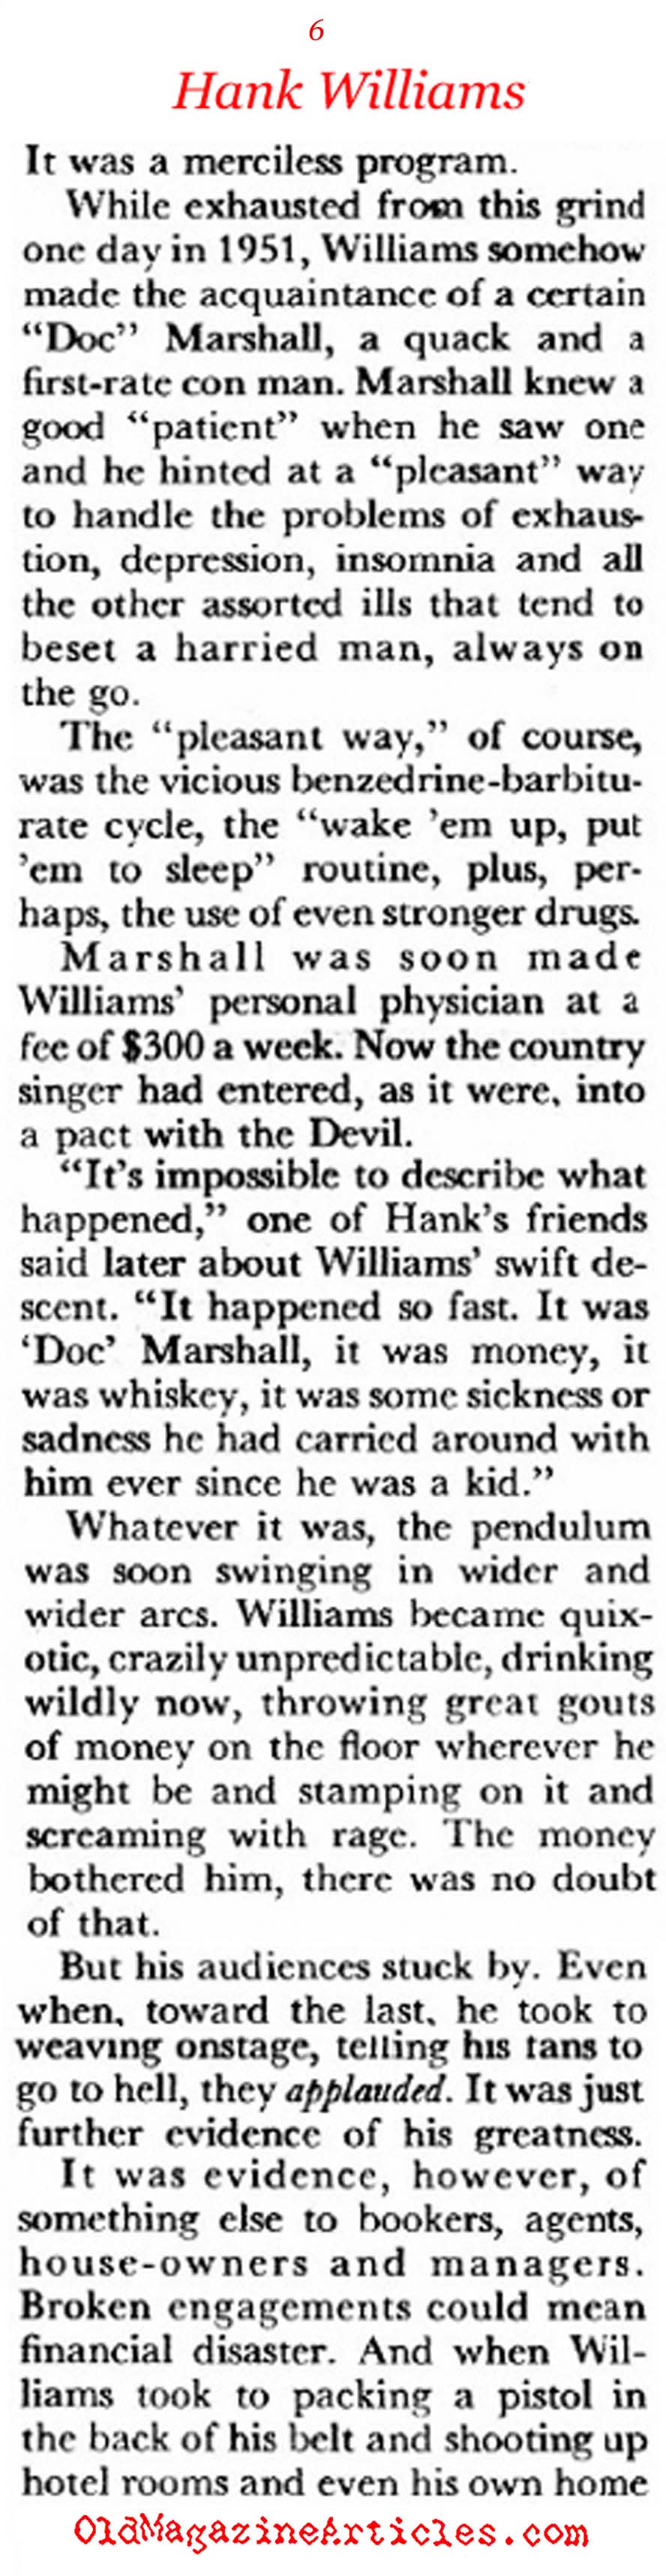 The Life and Death of Hank Williams (Coronet Magazine, 1956)